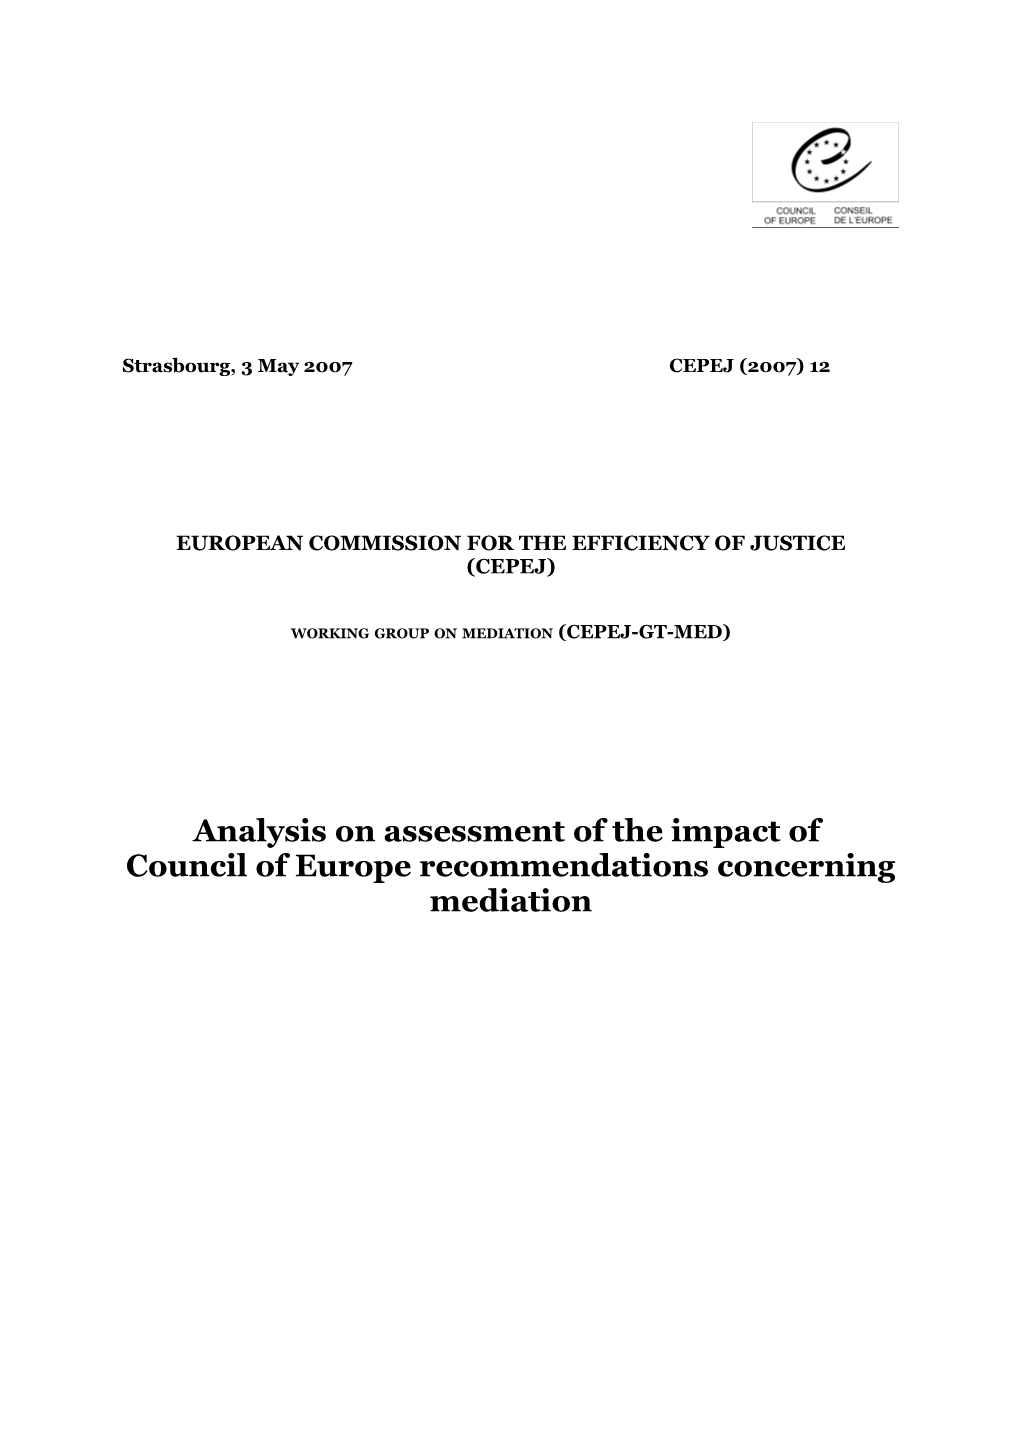 European Commission for the Efficiency of Justice